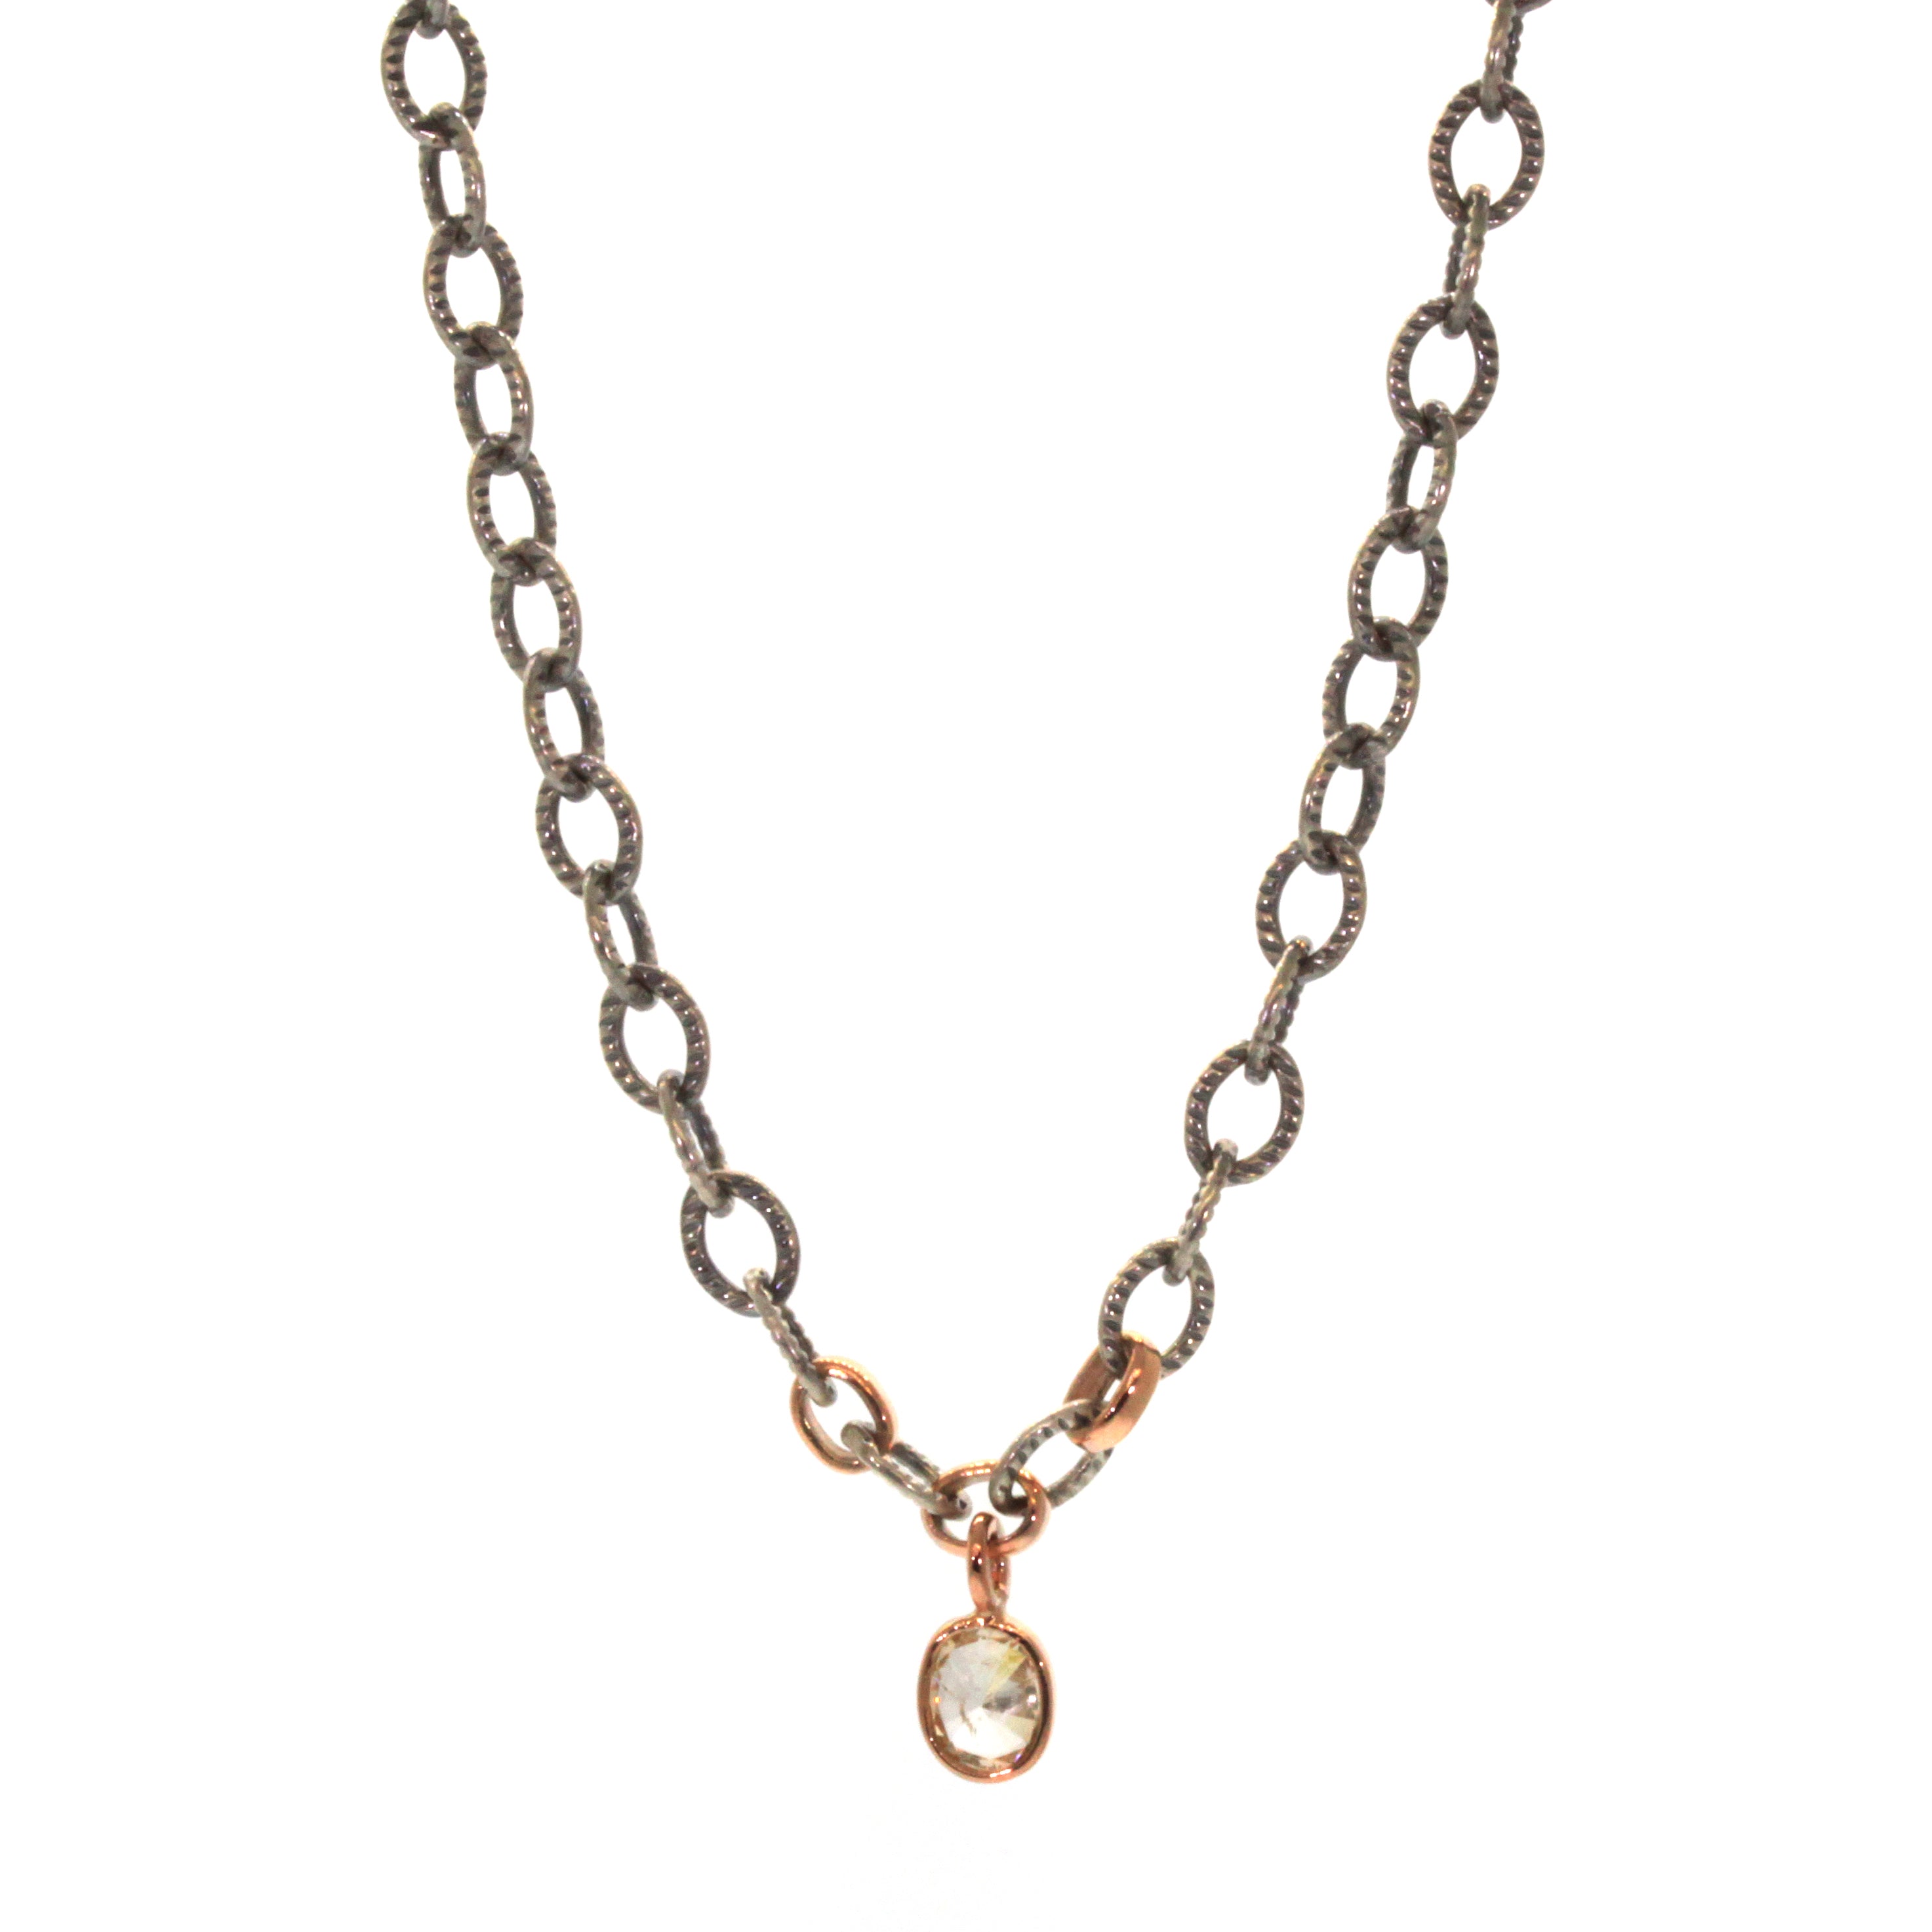 This Chunky Champagne Diamond Necklace was handcrafted at Rebecca Lankford Designs in Houston, Texas. It features a light, oval champagne diamond bezel set in rose gold on a rhodium plated chunky chain with 3 accenting rose gold links.